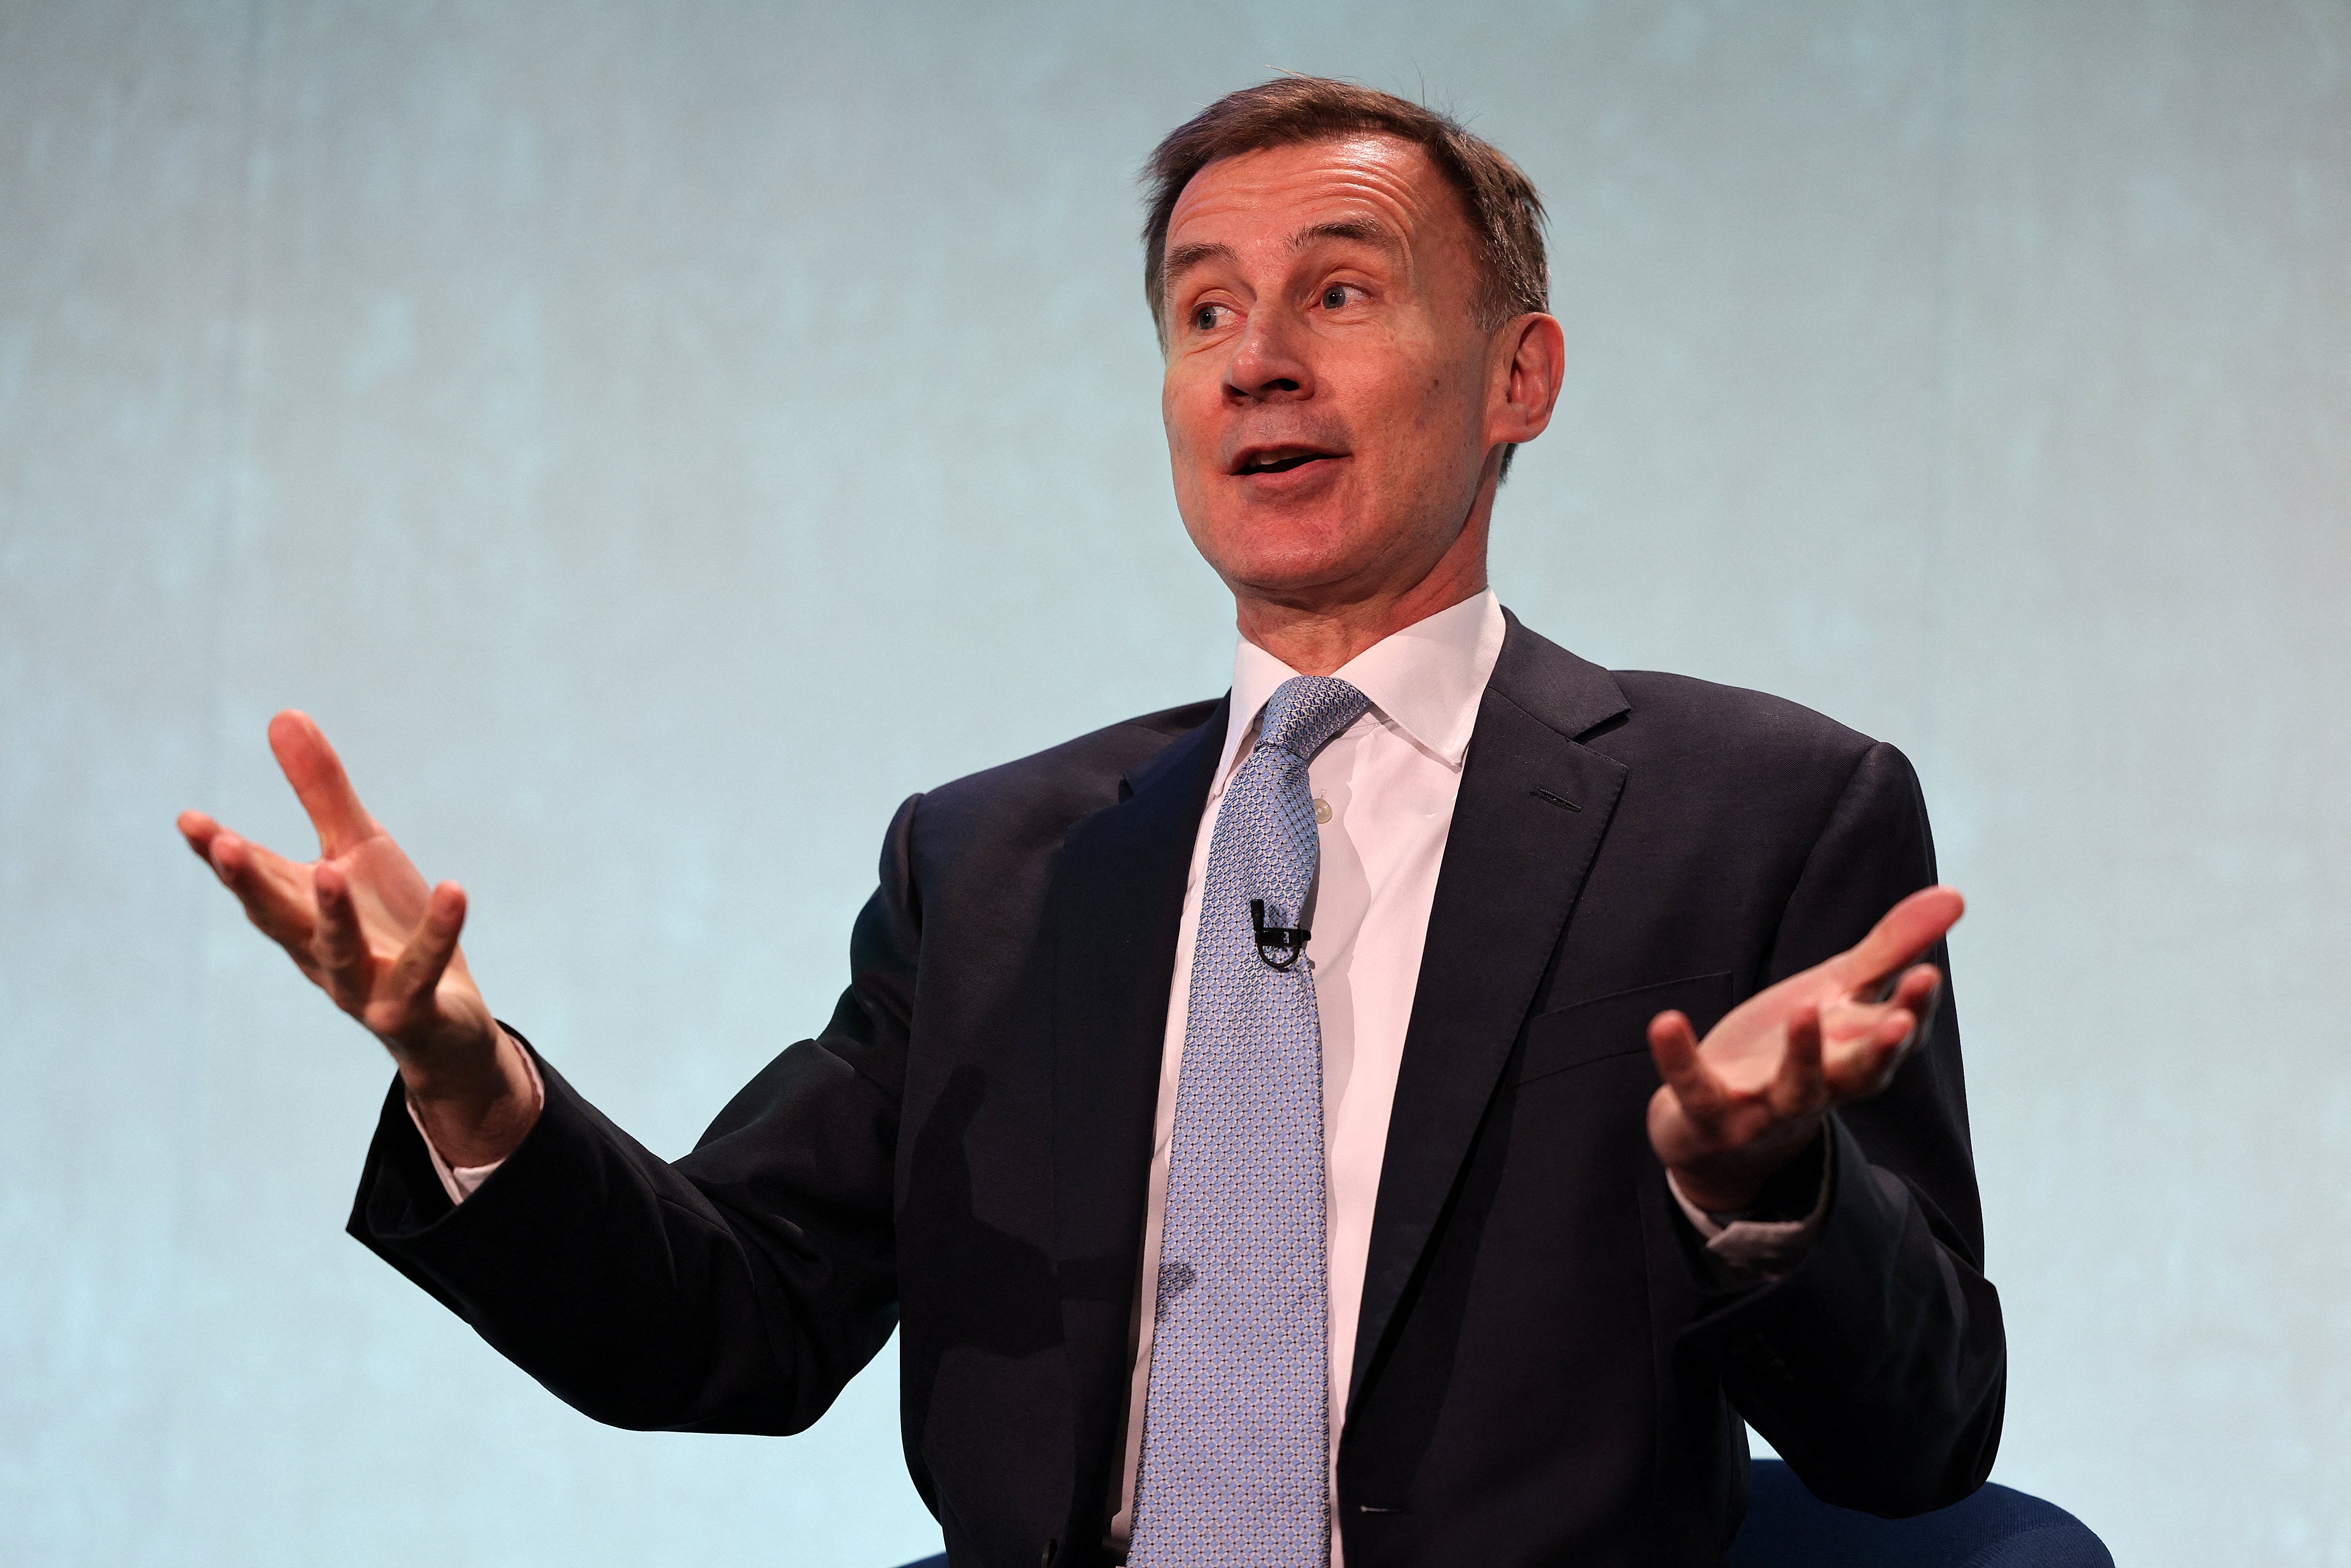 Chancellor Jeremy Hunt said his tax cuts would get the economy growing again